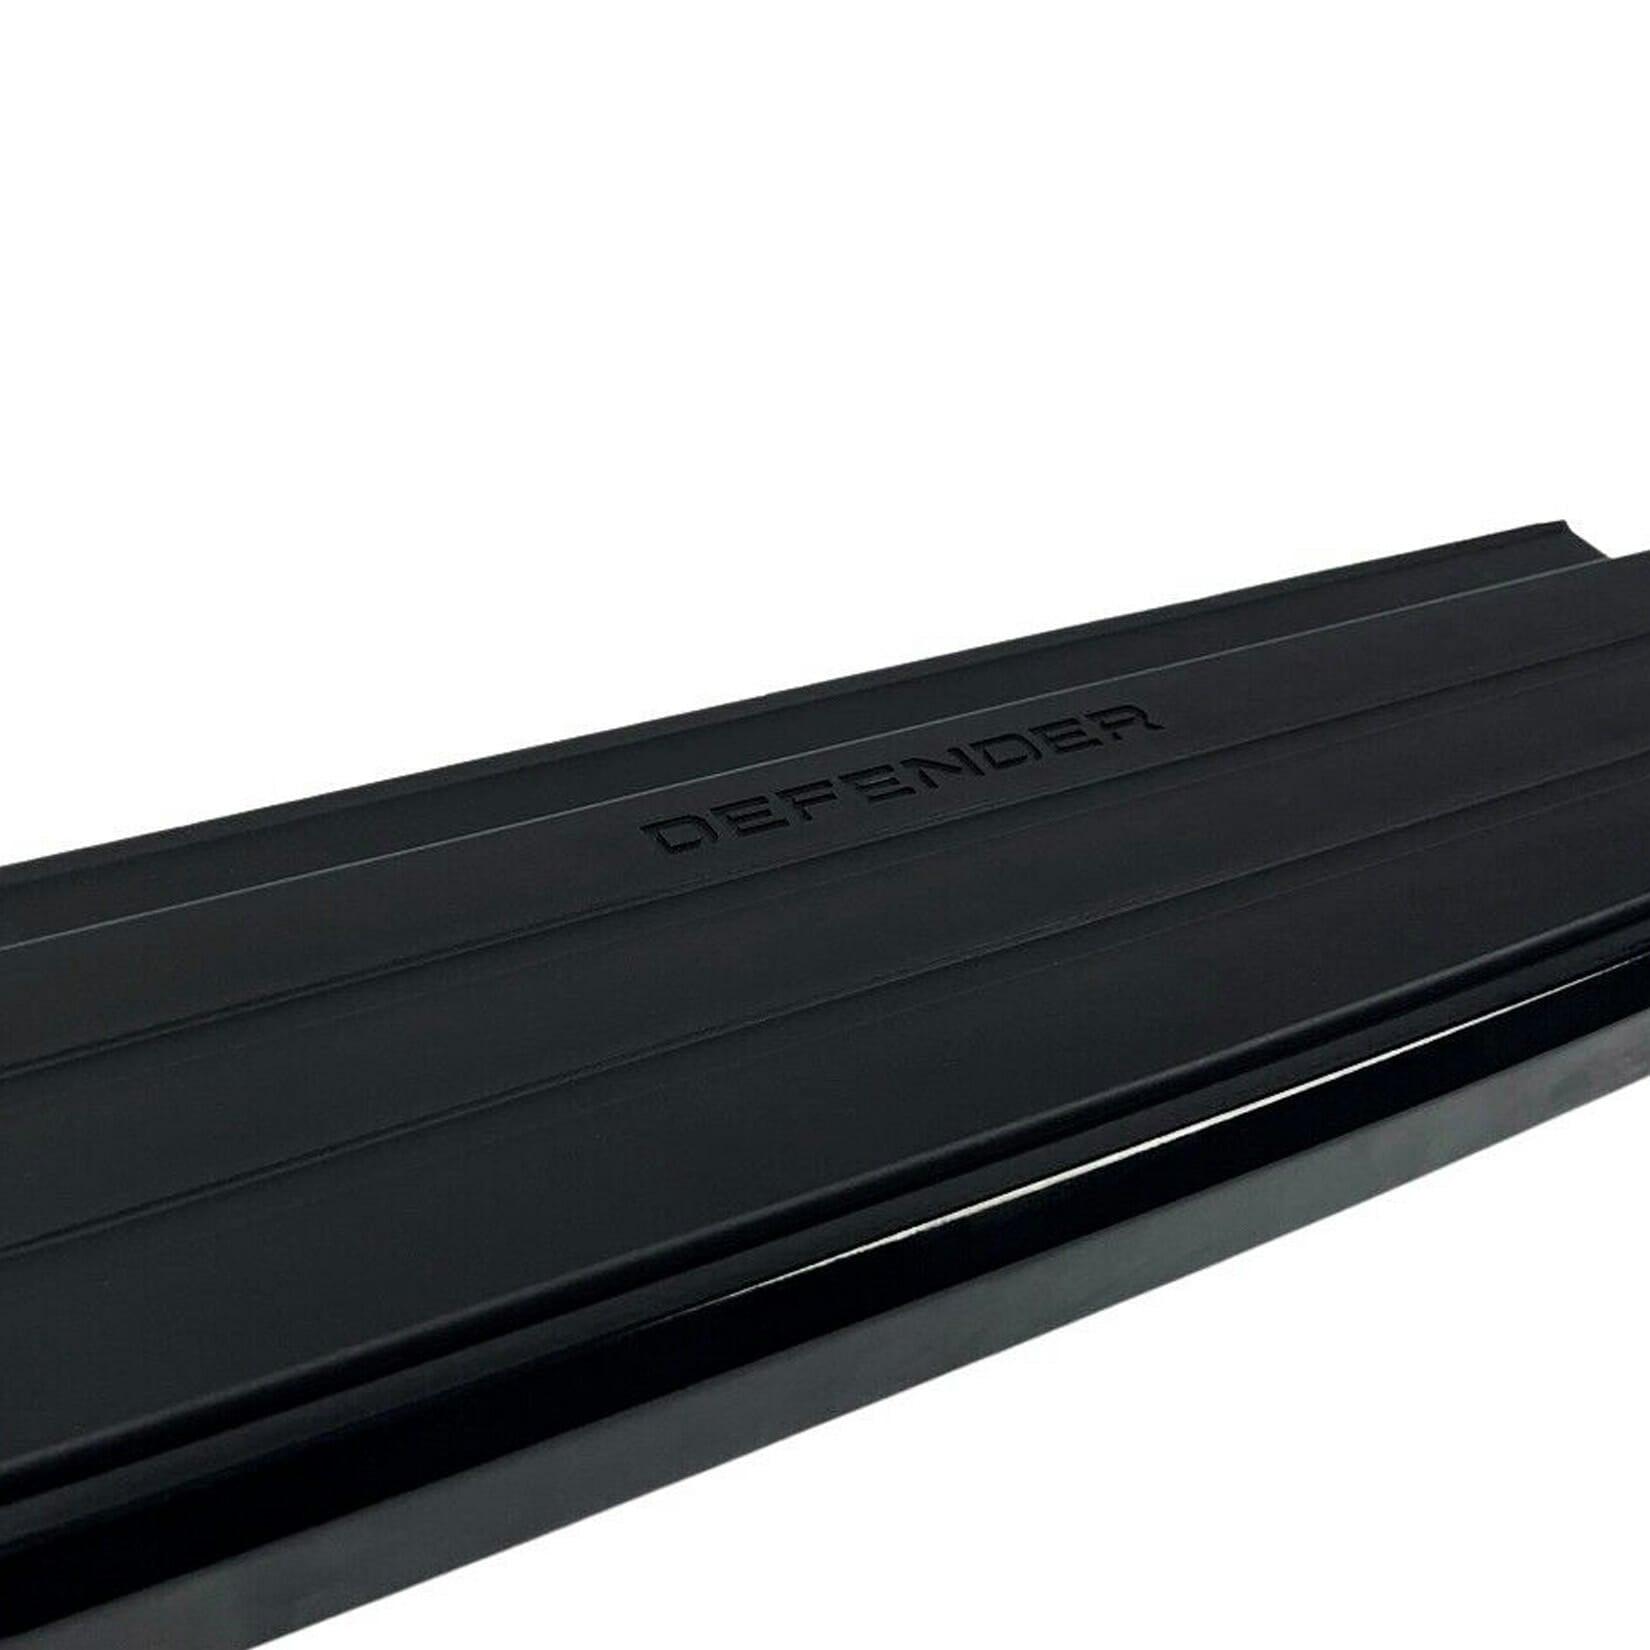 LAND ROVER DEFENDER 90 L663 2020 ON OE STYLE RUNNING BOARDS - PAIR - IN BLACK (WITH LOGO) - Storm Xccessories2